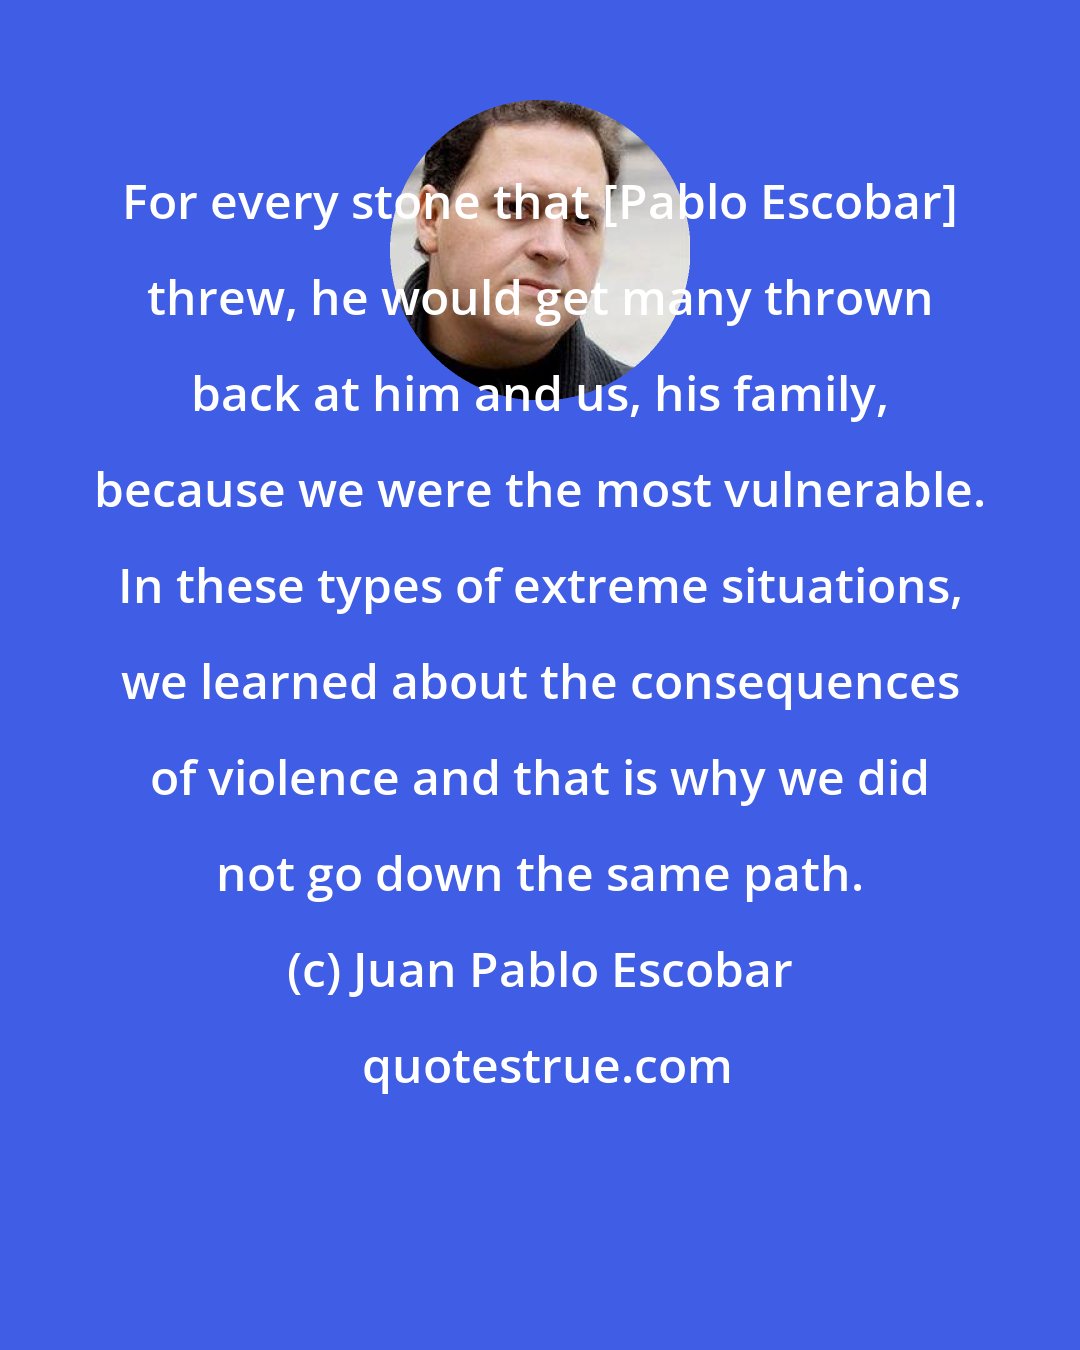 Juan Pablo Escobar: For every stone that [Pablo Escobar] threw, he would get many thrown back at him and us, his family, because we were the most vulnerable. In these types of extreme situations, we learned about the consequences of violence and that is why we did not go down the same path.